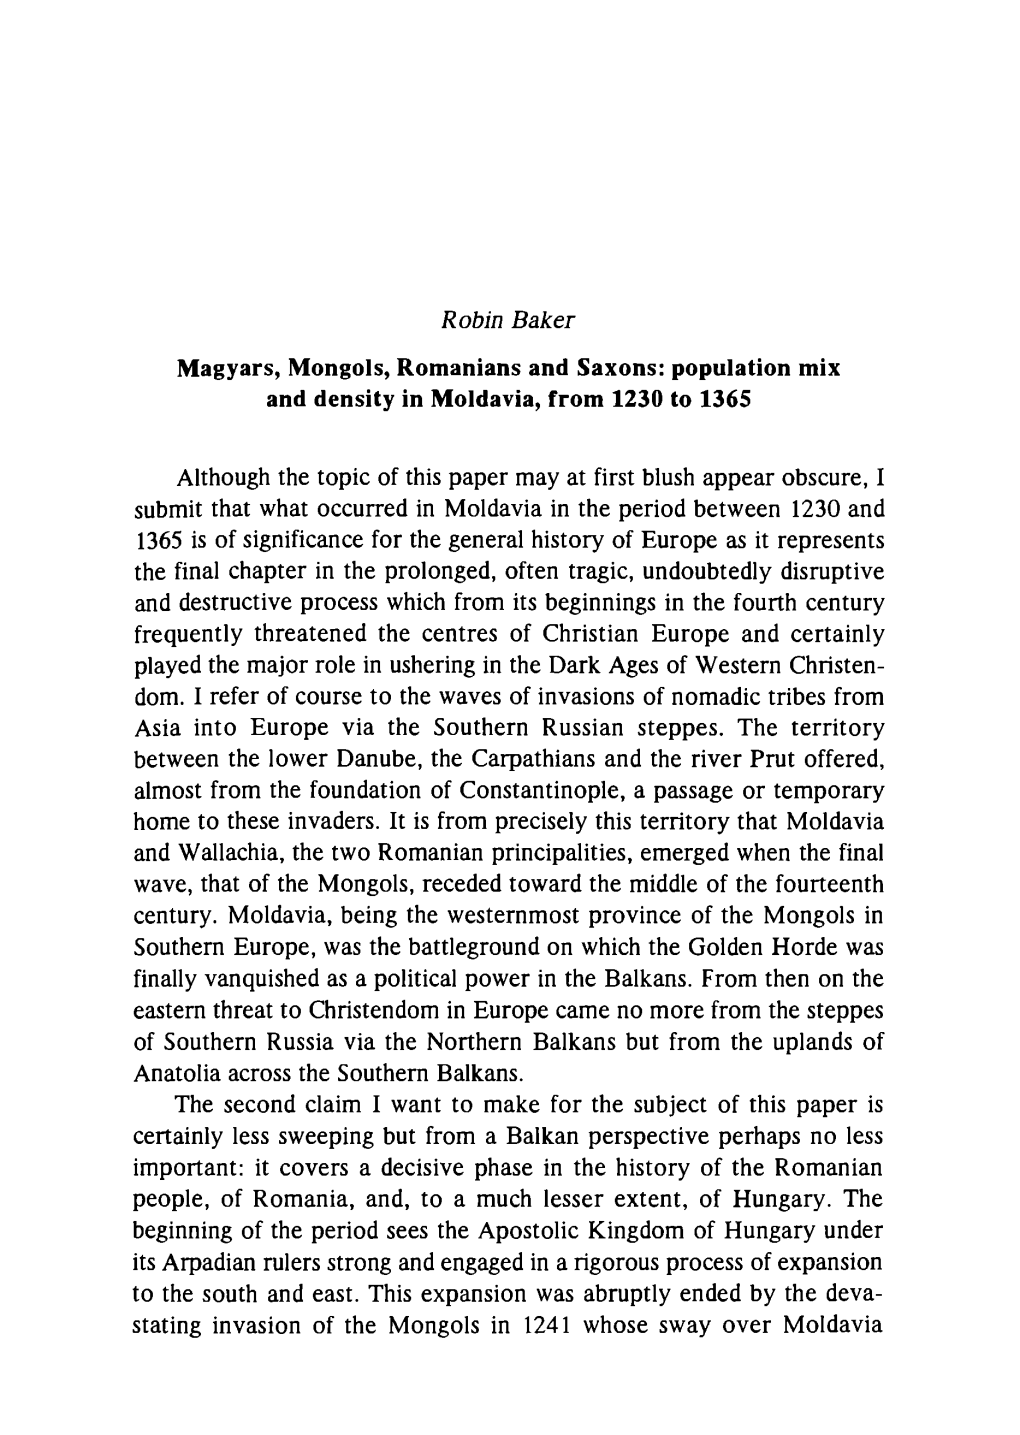 Robin Baker Although the Topic of This Paper May at First Blush Appear